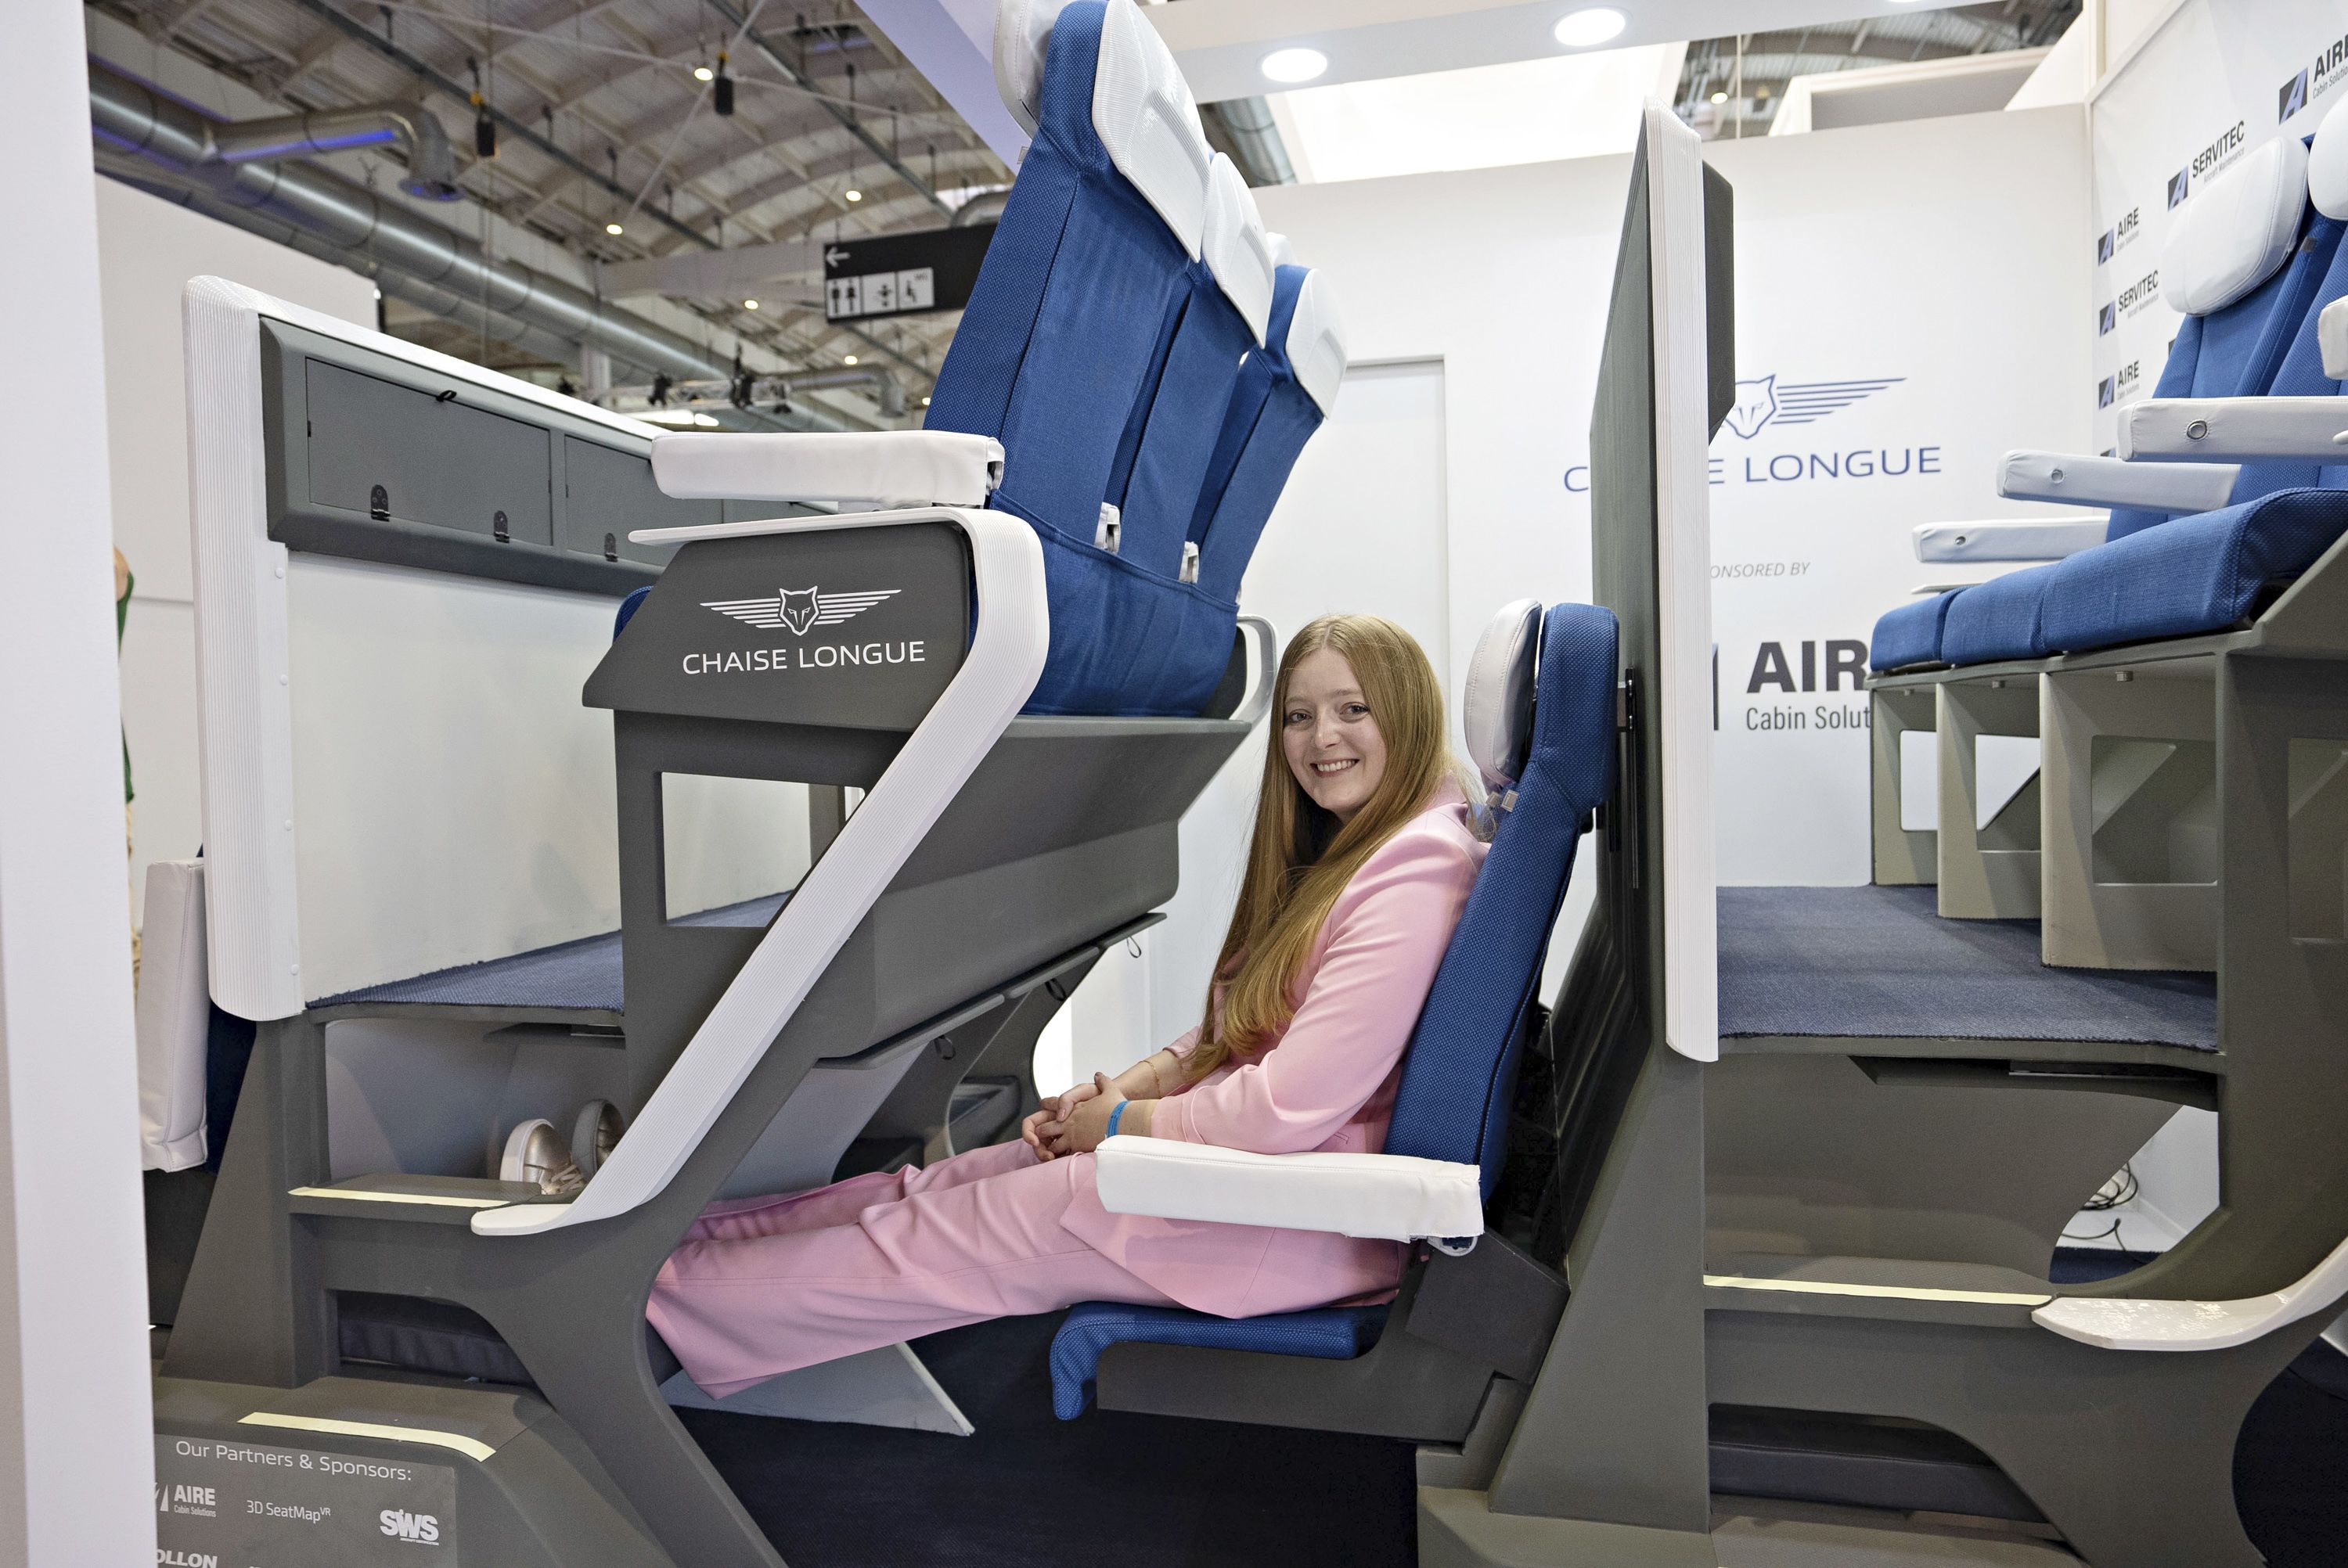 The double-decker airplane seat is back. Here's what it looks like now